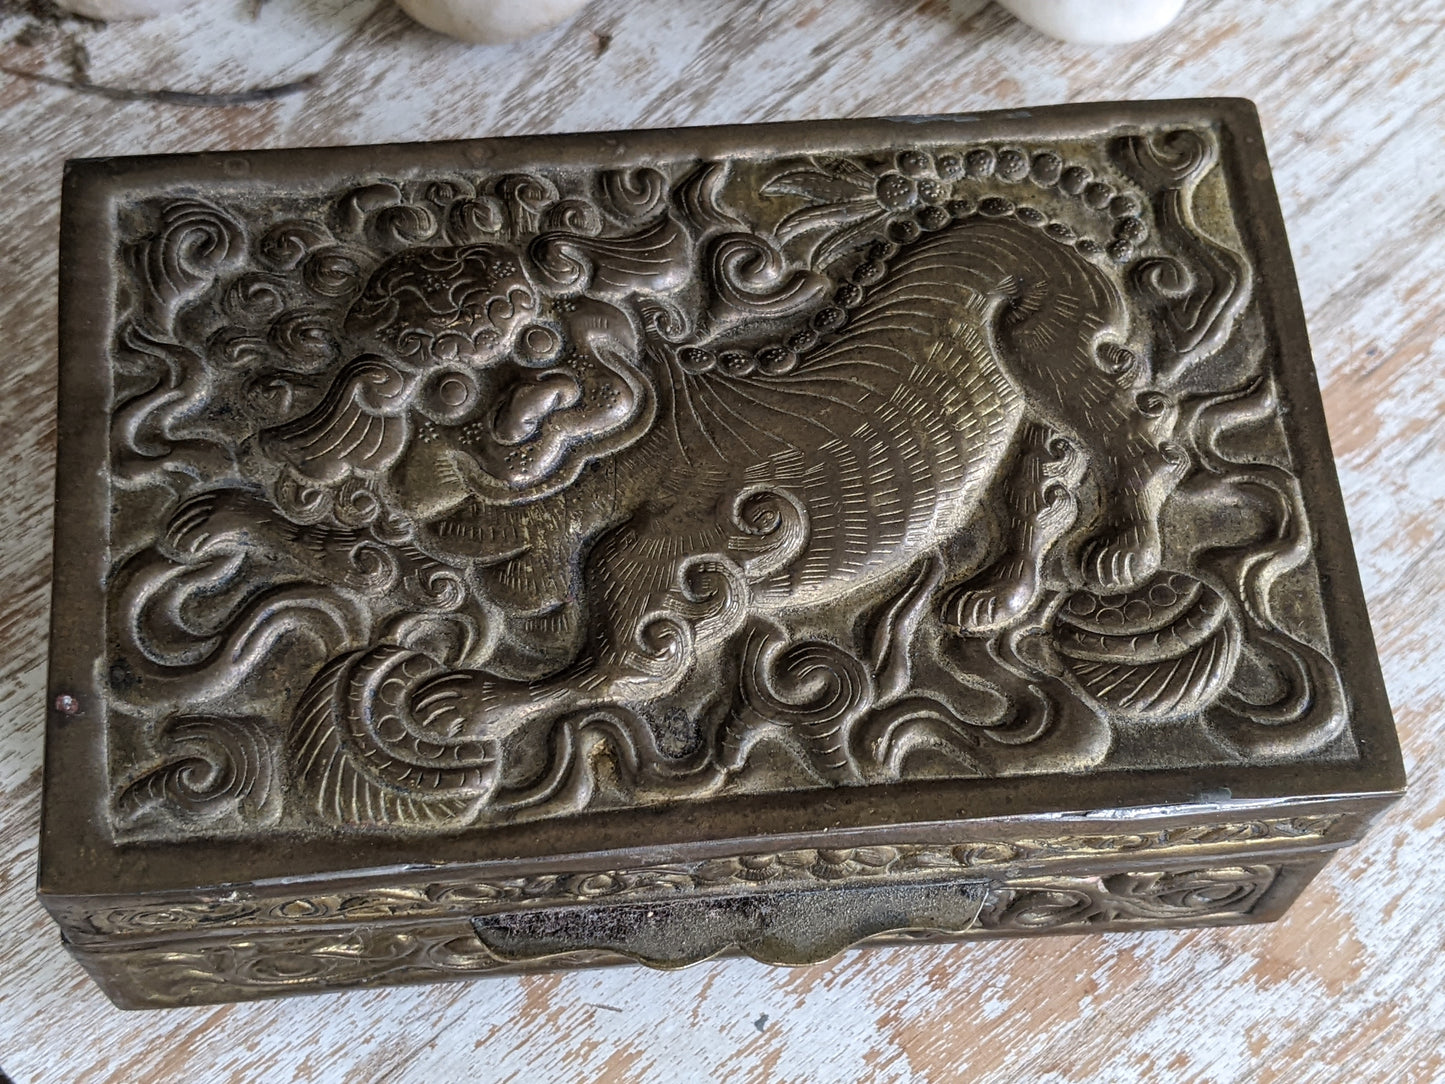 VIntage Chinese Foo Embossed Relief Cedar Box Trinket Cigarette Brass Finish !! Awesome Vintage Gifts !! Unique Gift Ideas !!